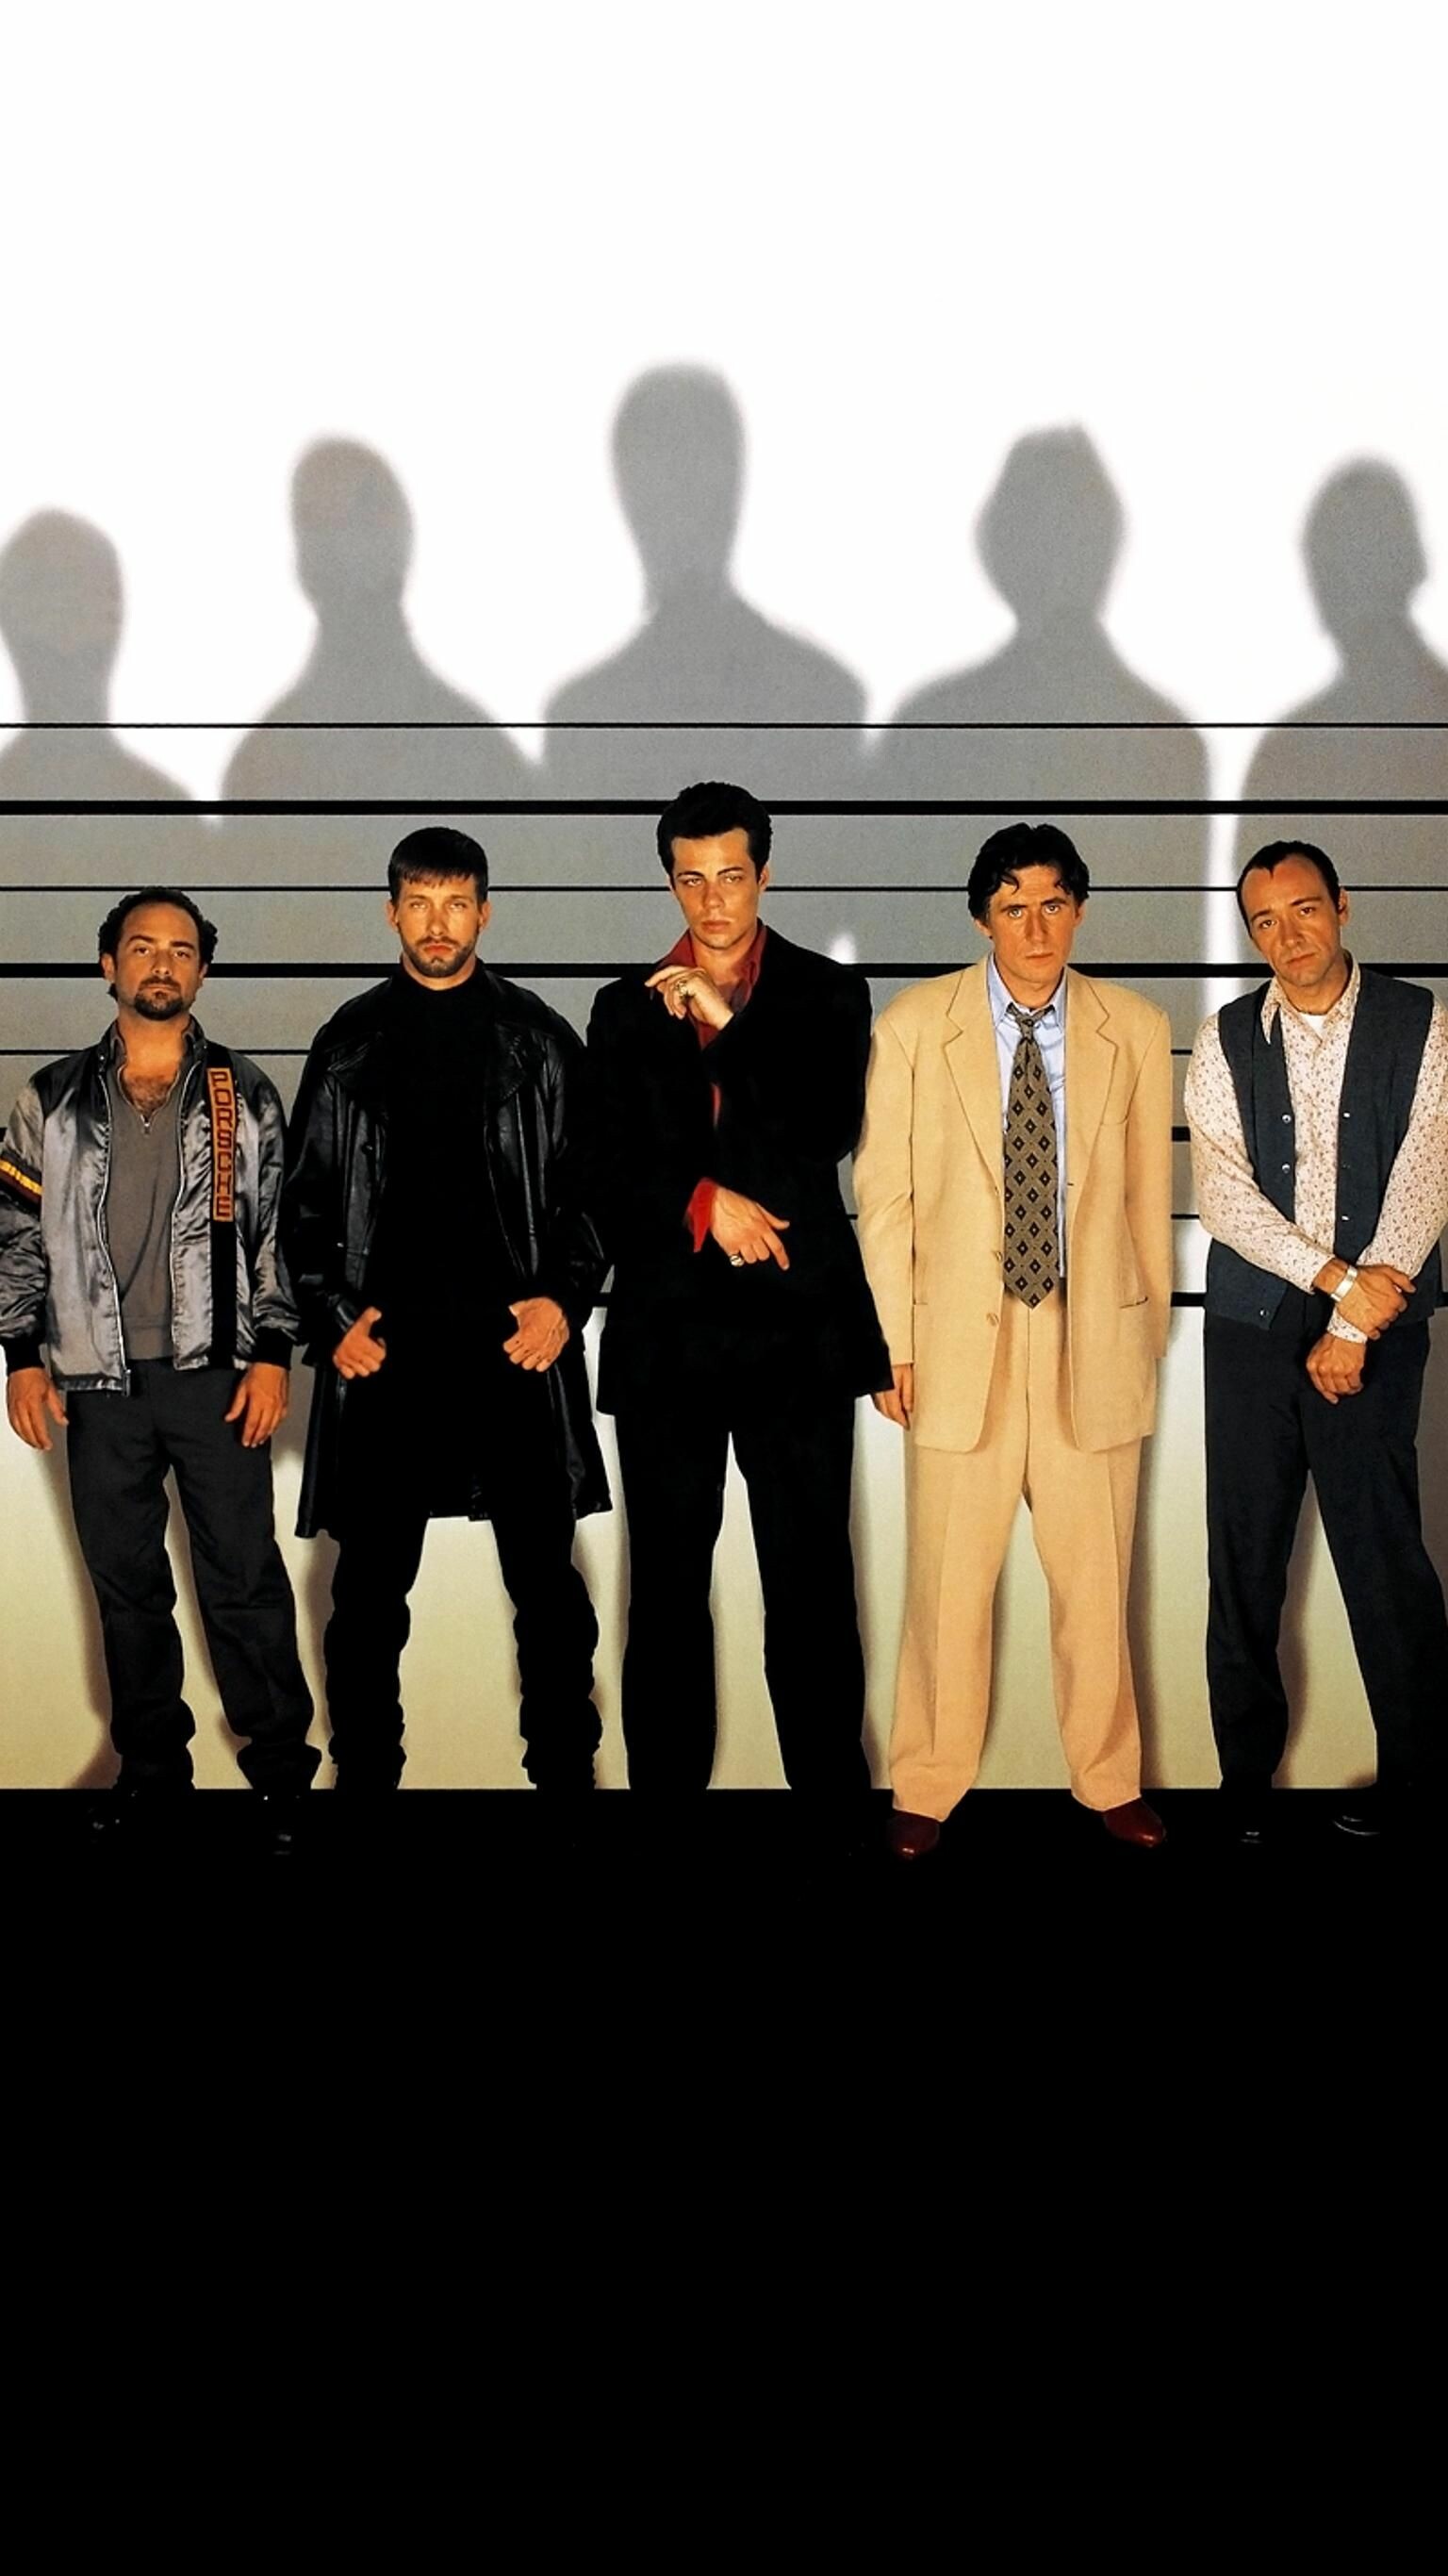 The Usual Suspects: The film stars Stephen Baldwin, Gabriel Byrne, Benicio del Toro, Kevin Pollak, and Kevin Spacey. 1540x2740 HD Background.